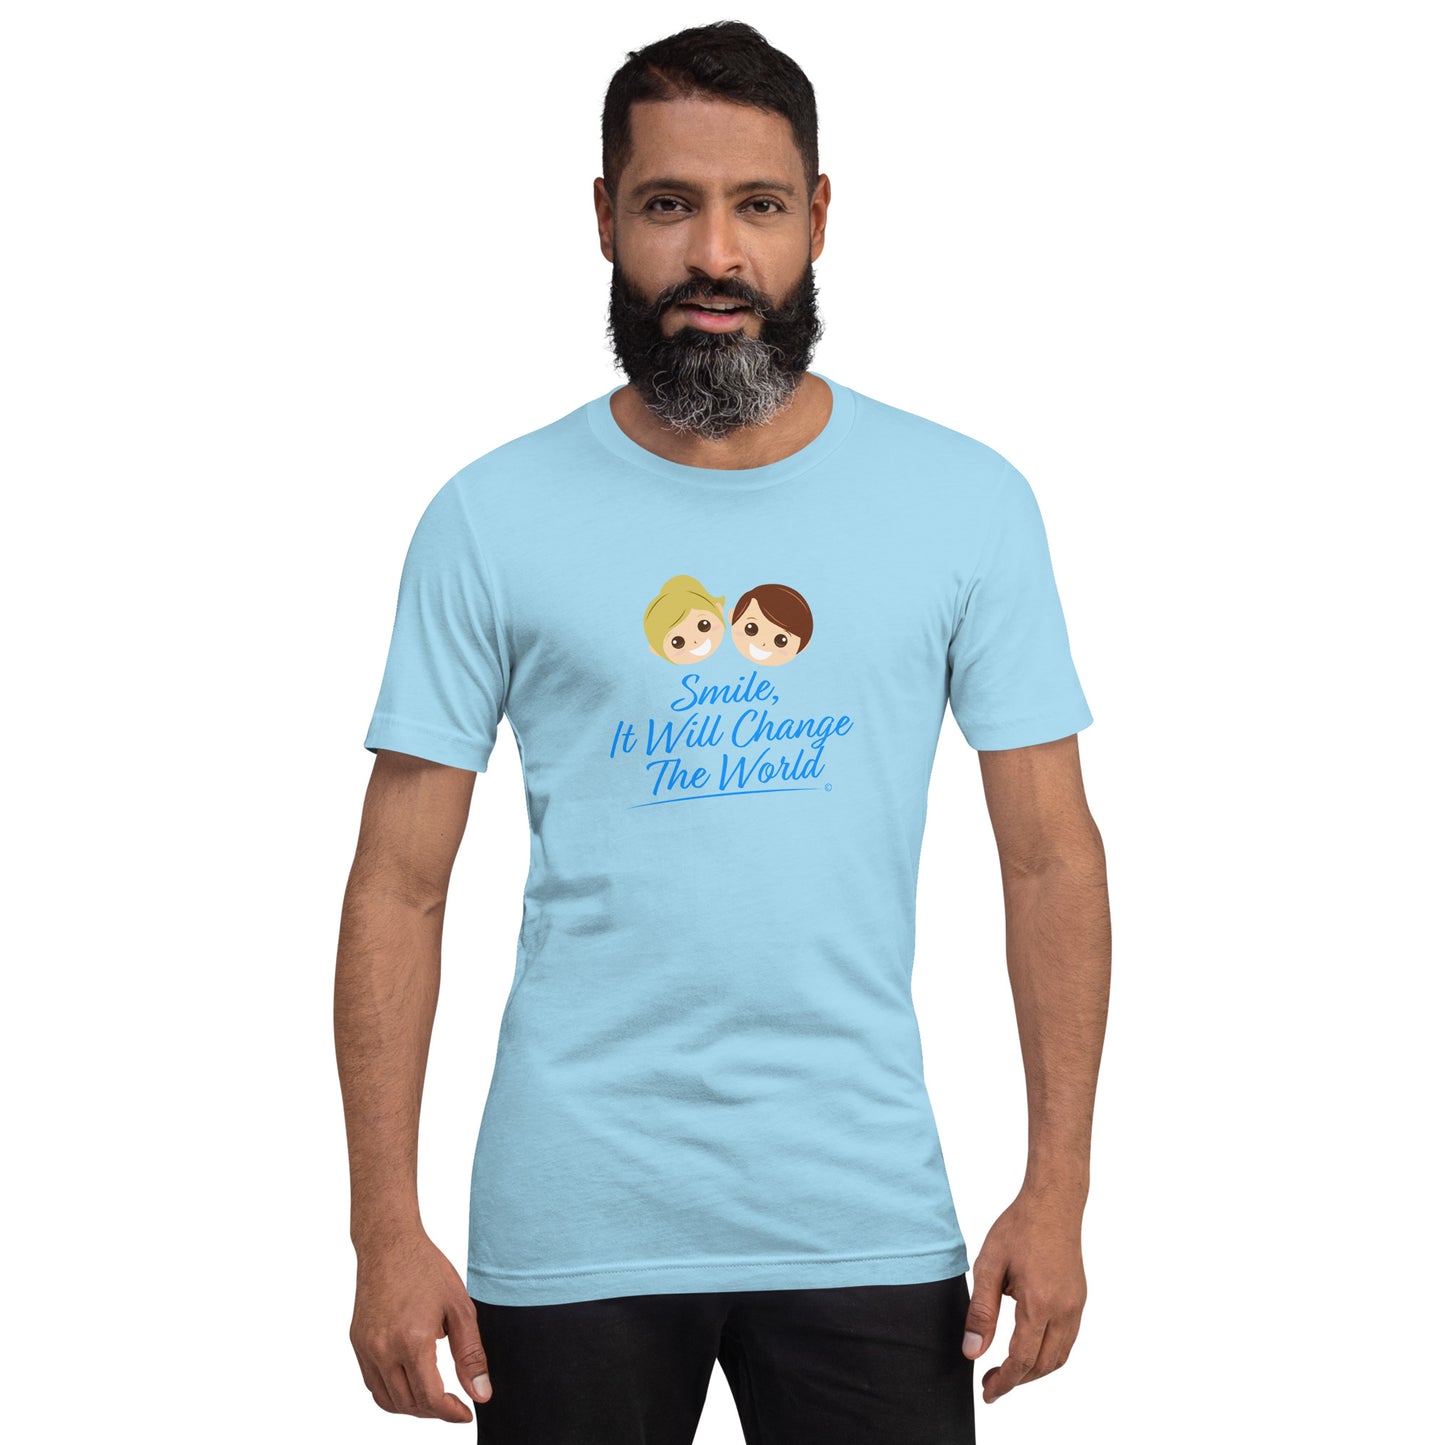 Smile, It Will Change The World Unisex T-Shirts